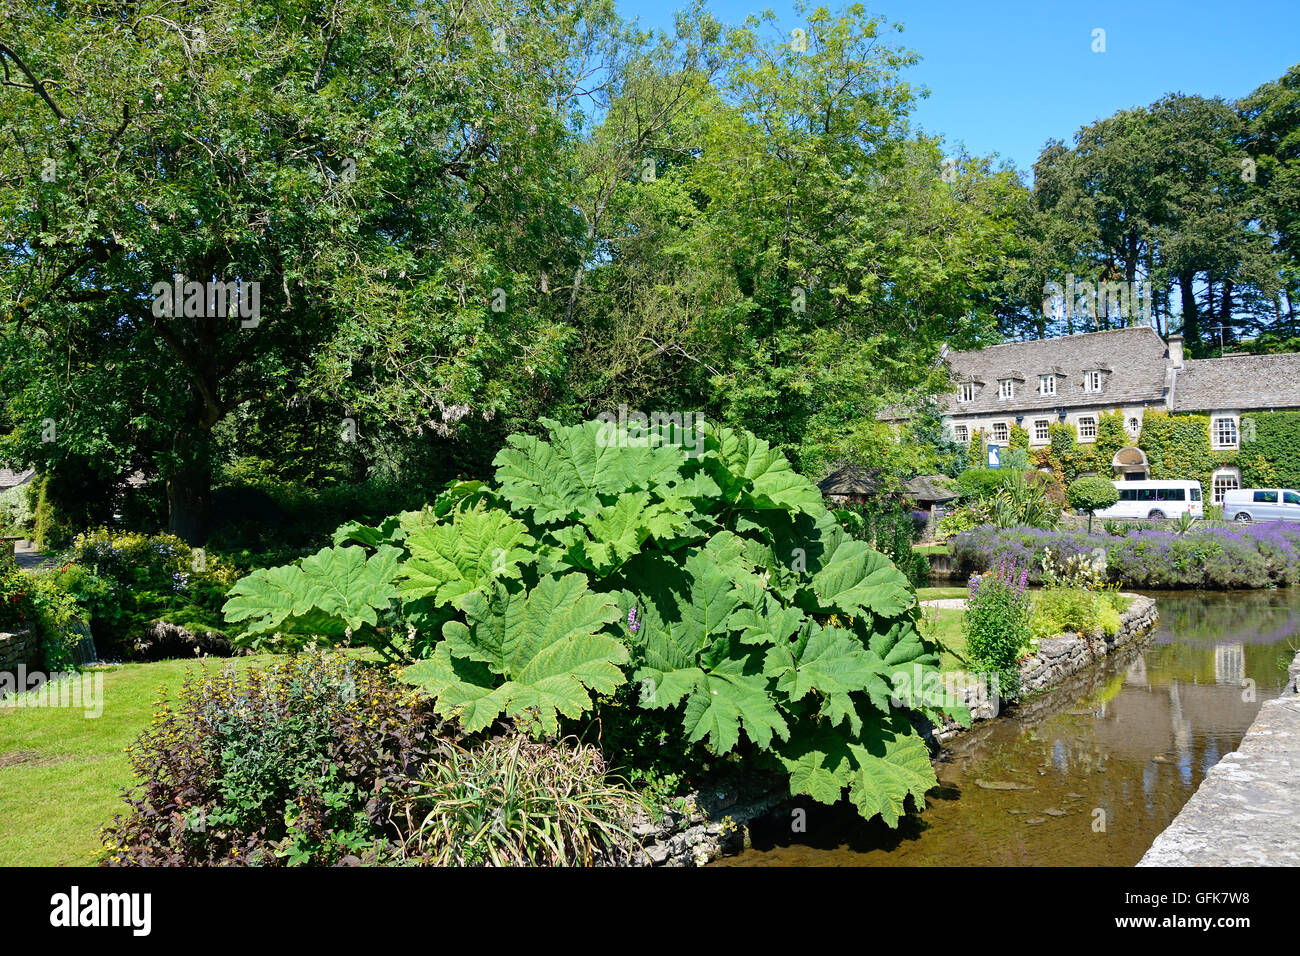 View of the trout farm garden and River Coln with The Swan Hotel to the rear, Bibury, Cotswolds, Gloucestershire, England, UK. Stock Photo